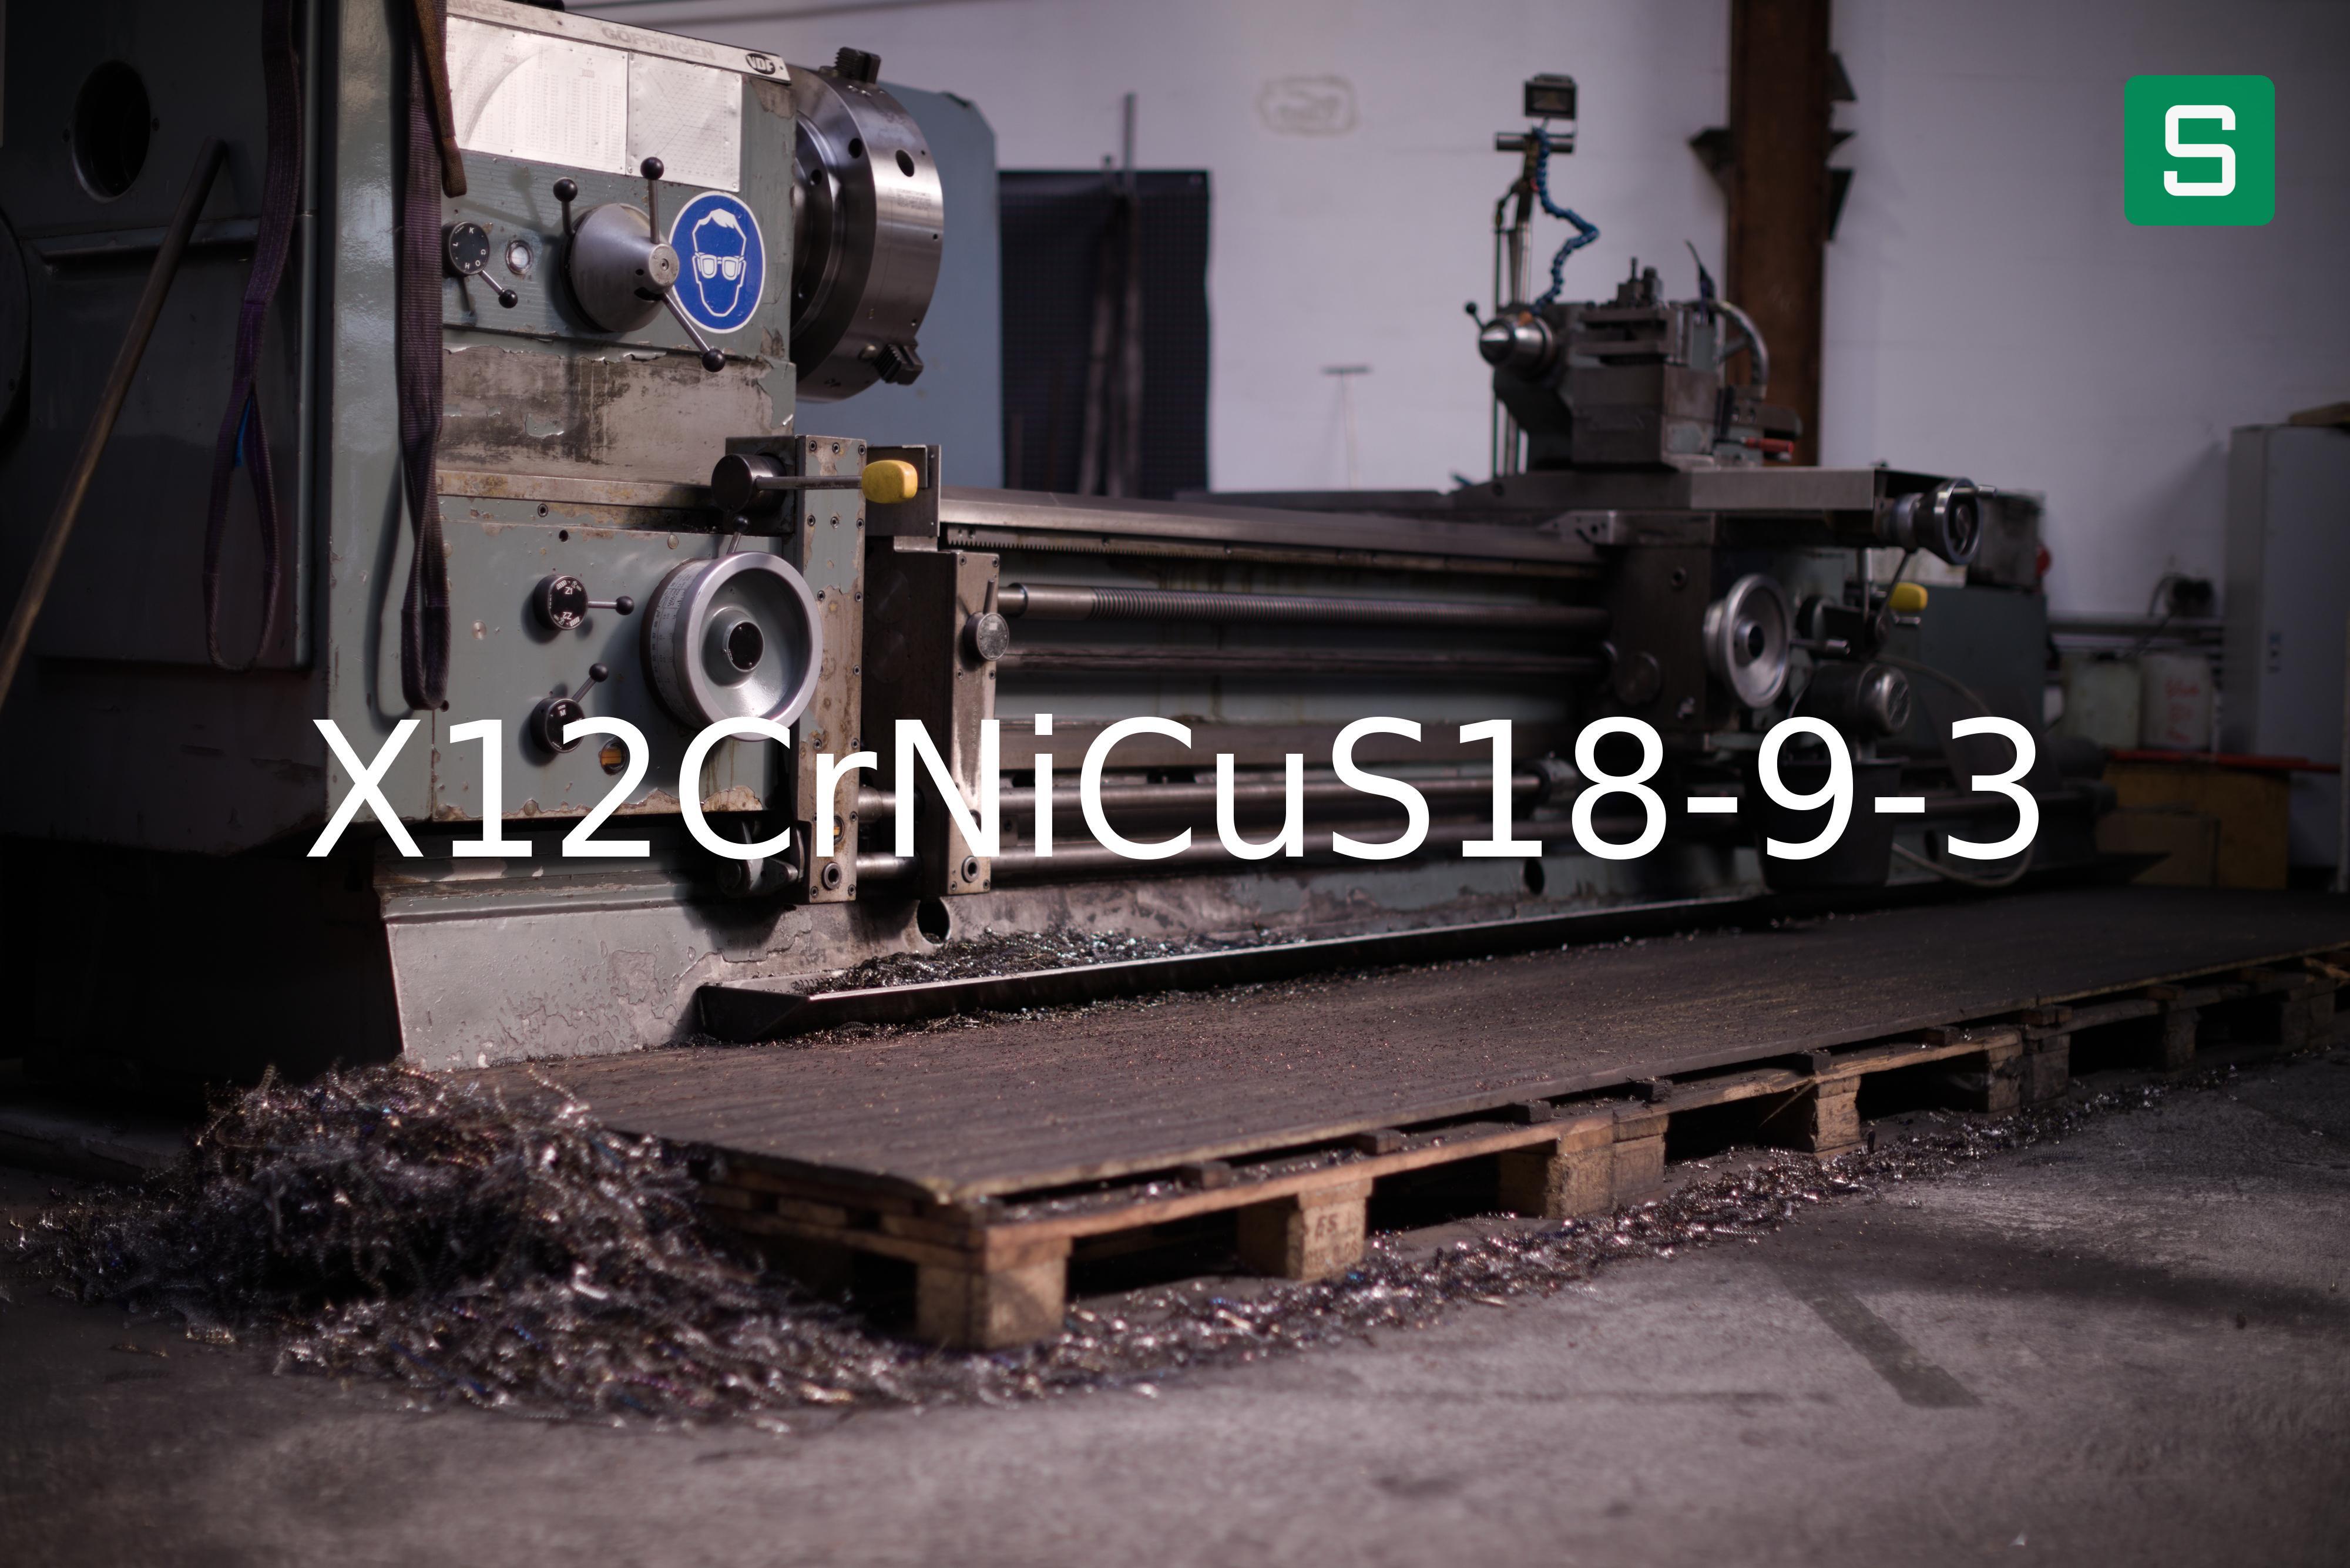 Steel Material: X12CrNiCuS18-9-3